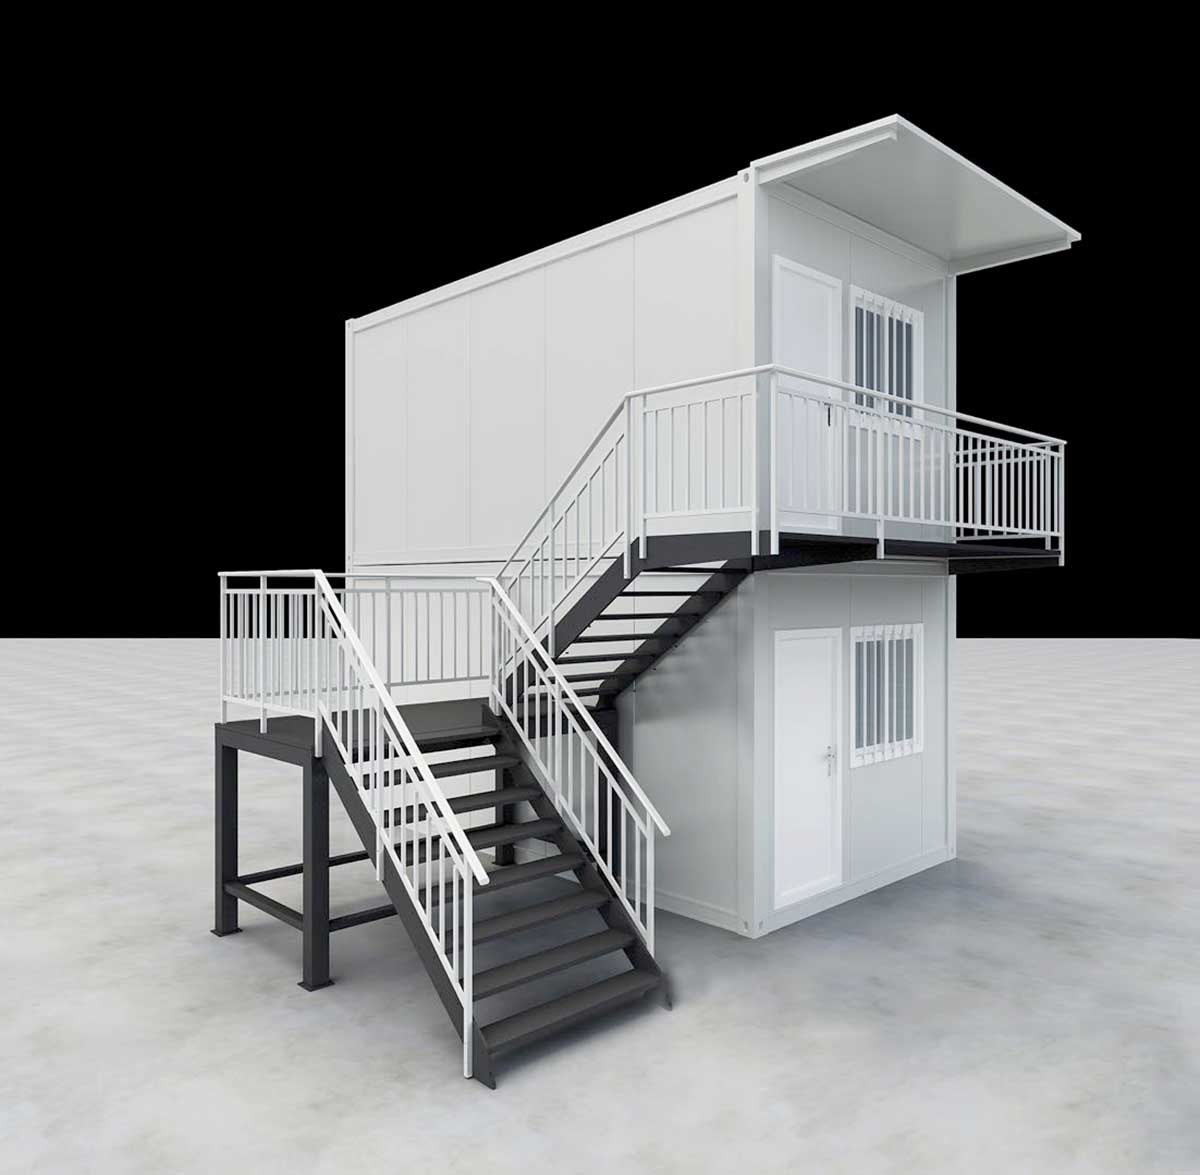 KEESSON 2 Story Modular Tiny Container House